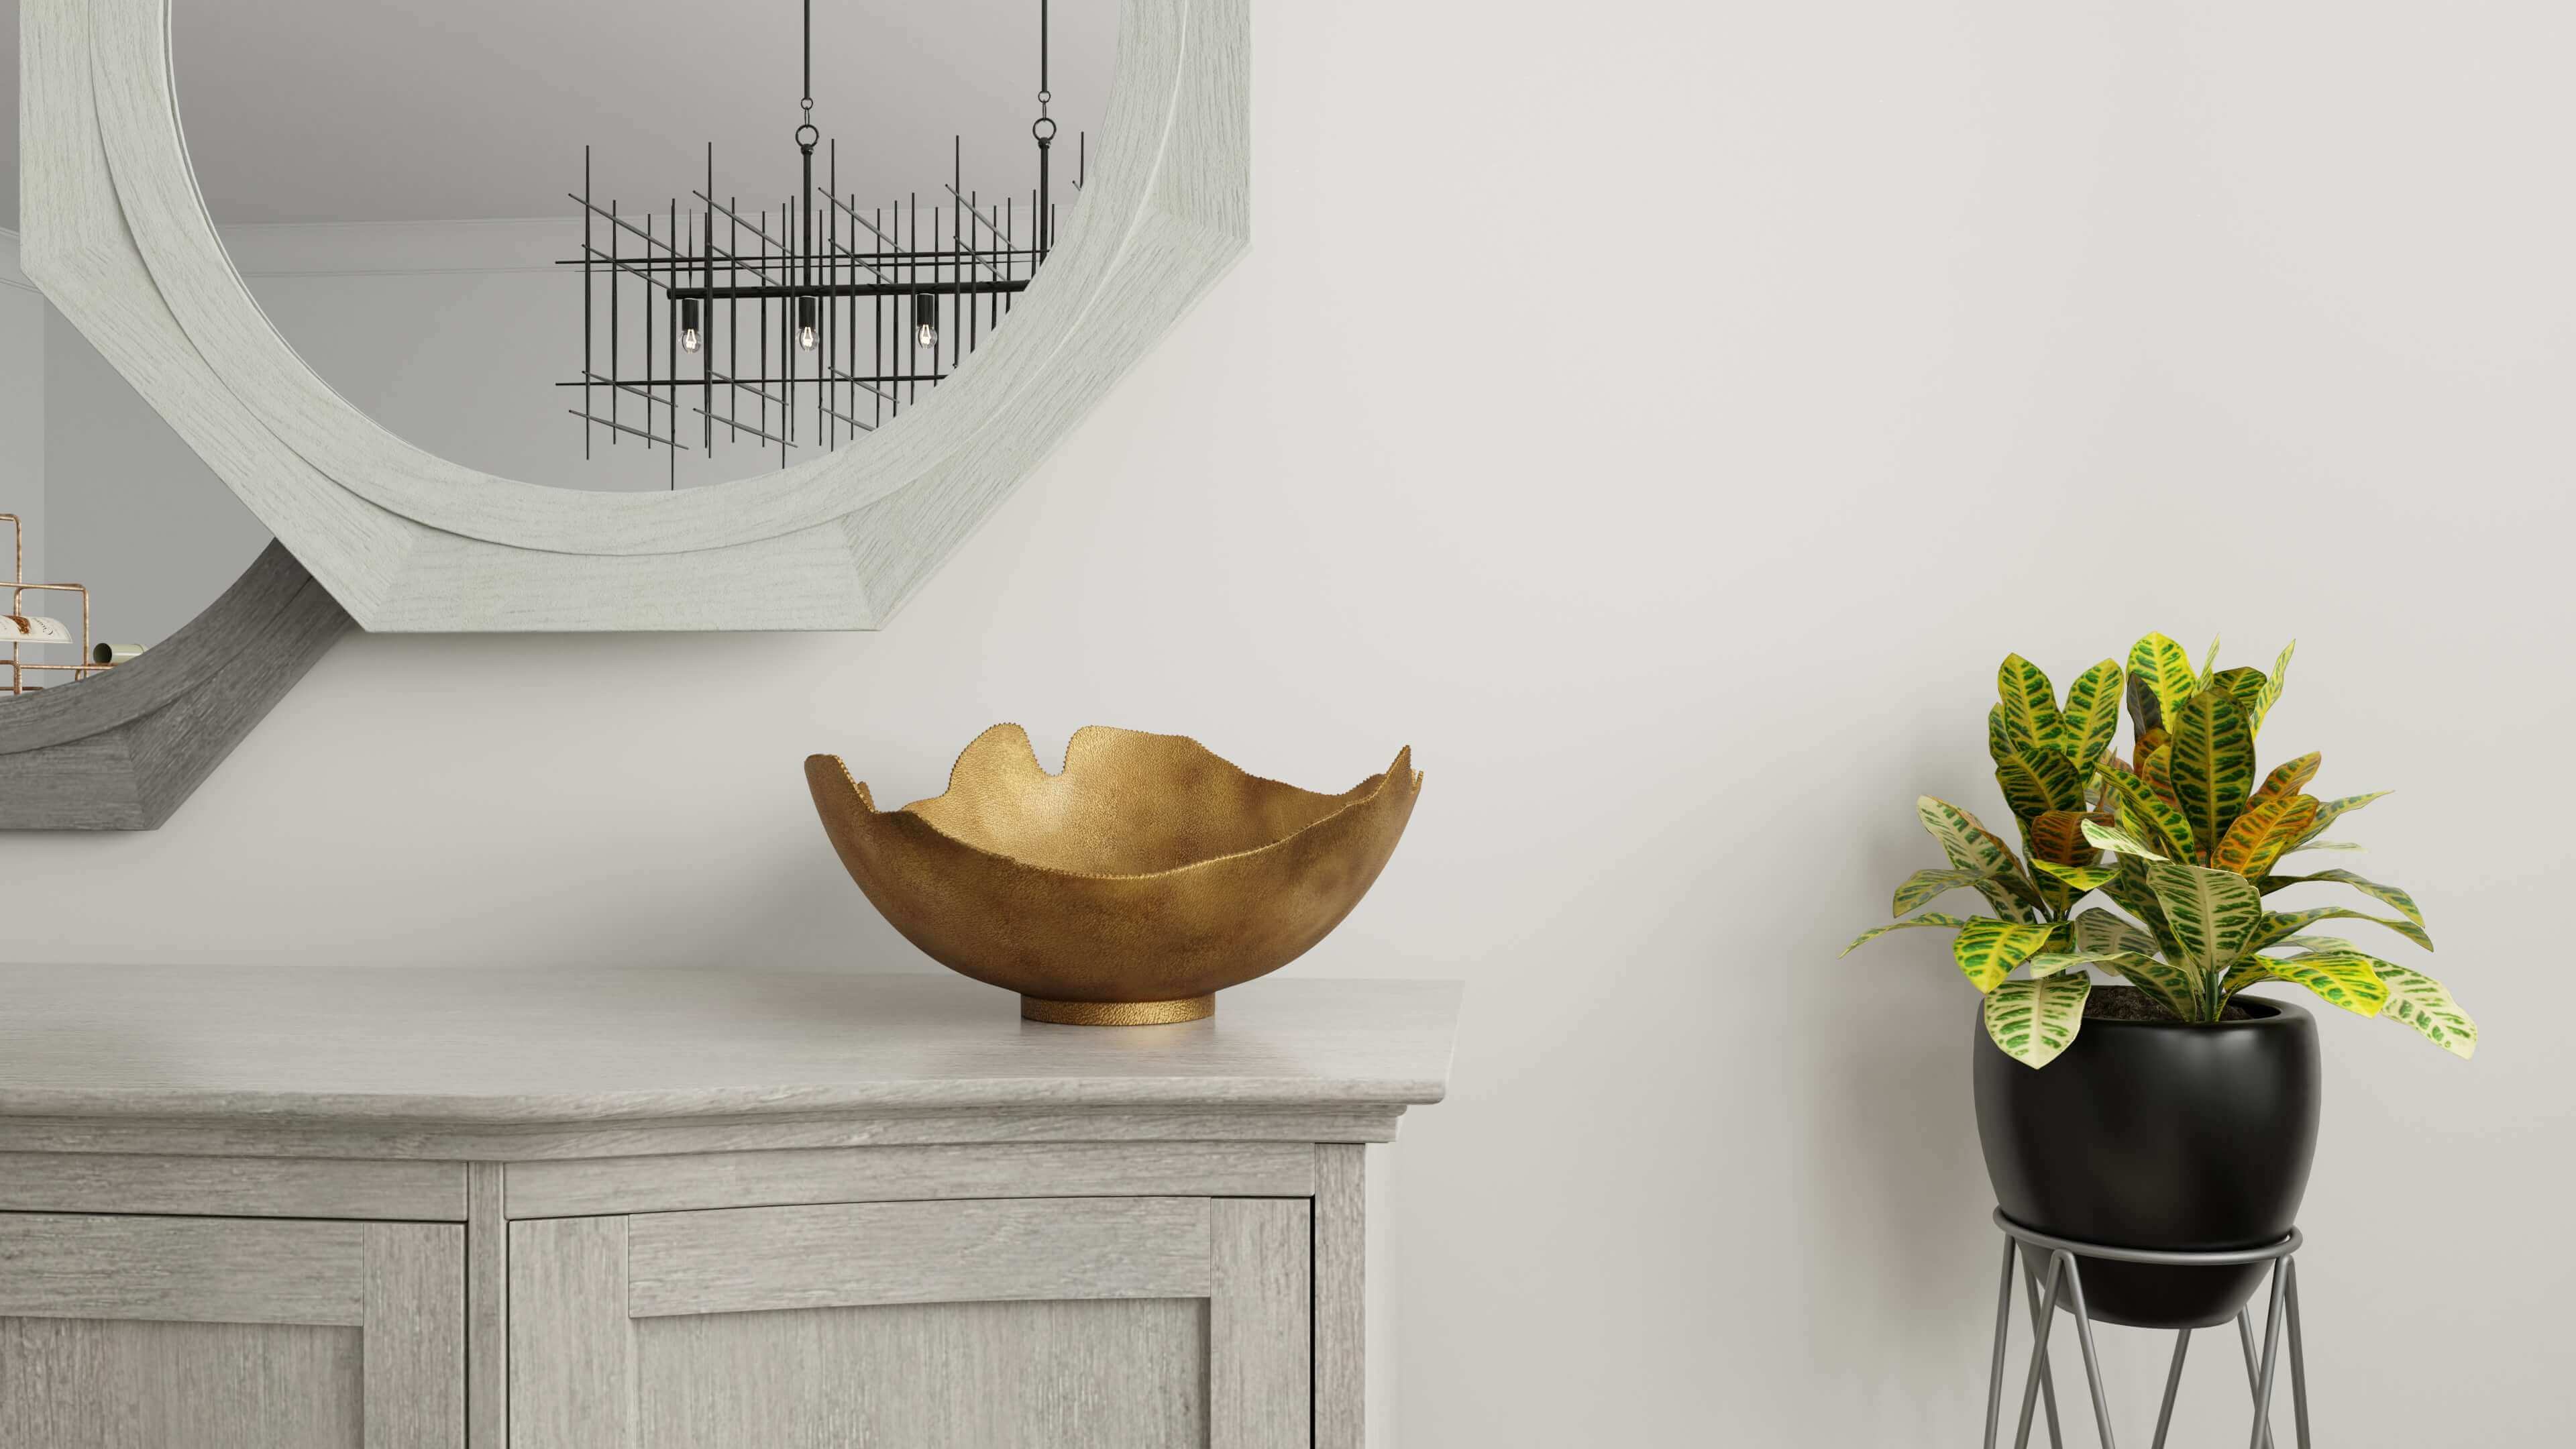 3D rendering of gold bowel, mirror, cabinet and potted plant in white room